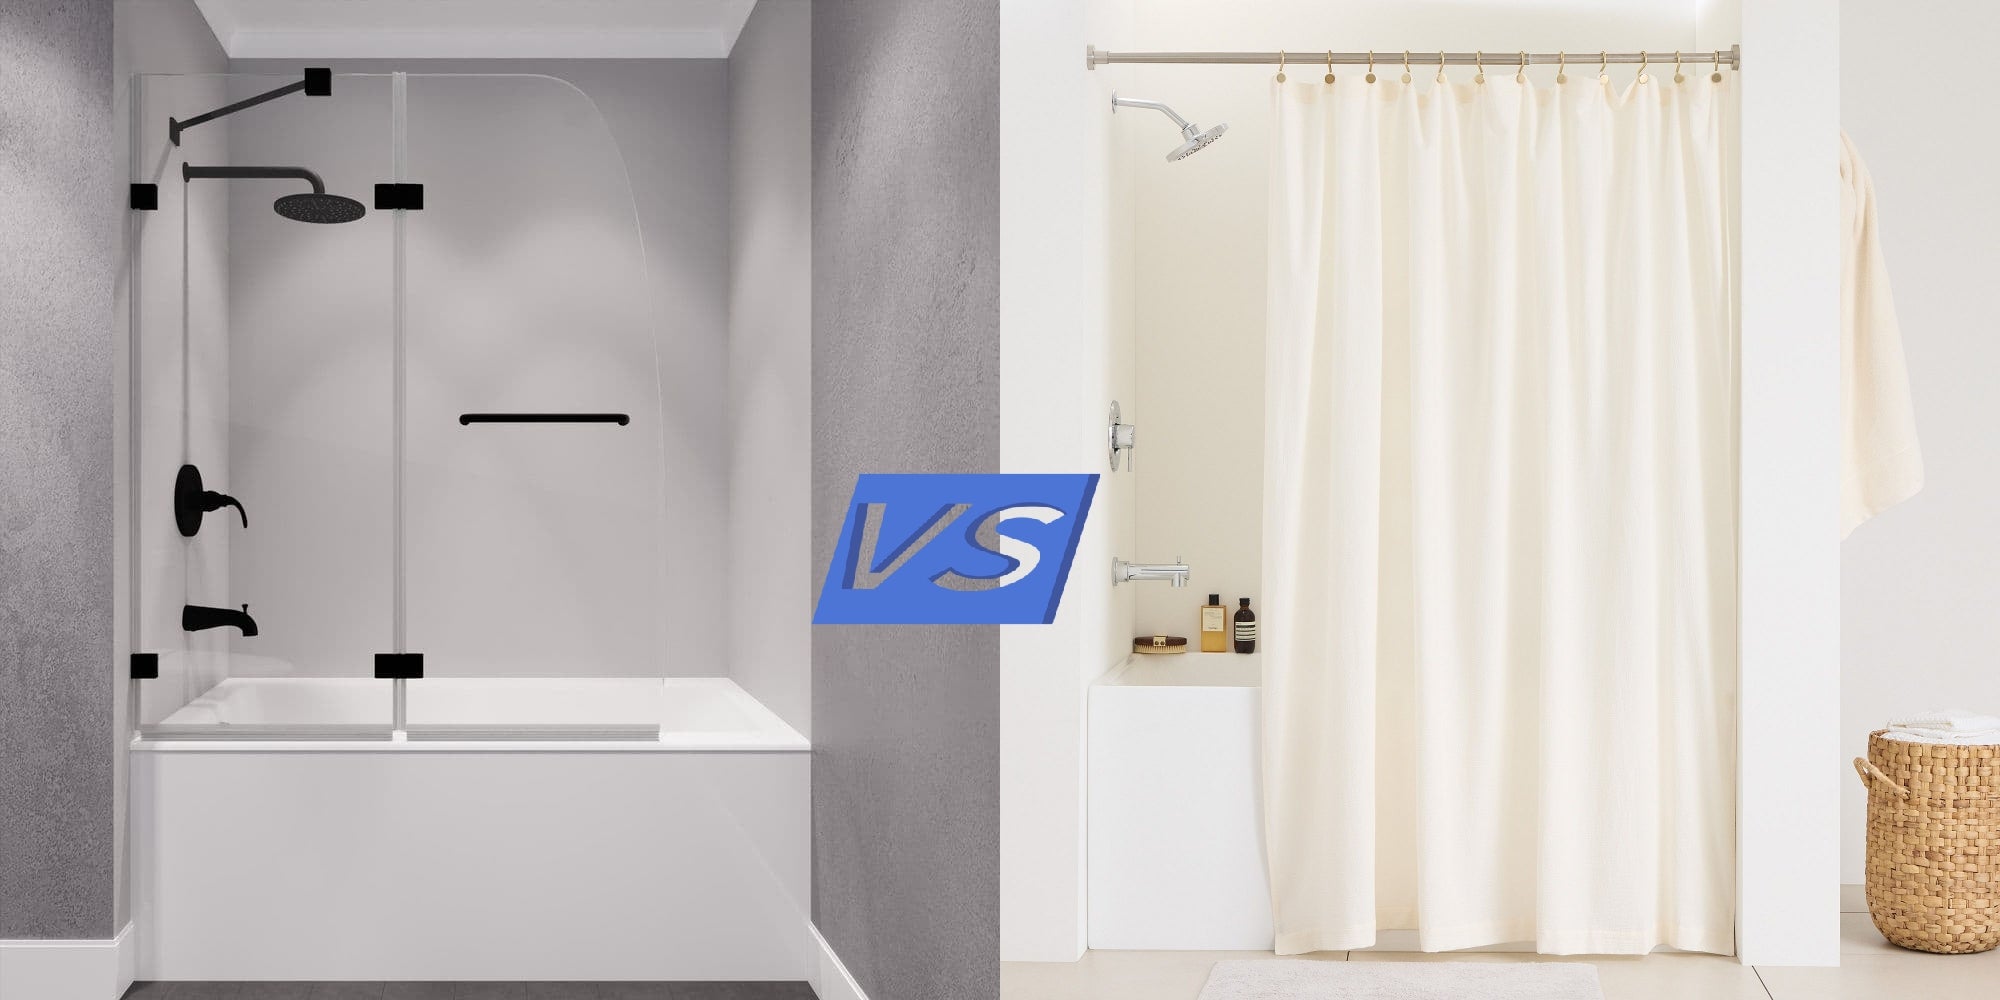 Why choose shower glass doors instead of bathroom curtains?